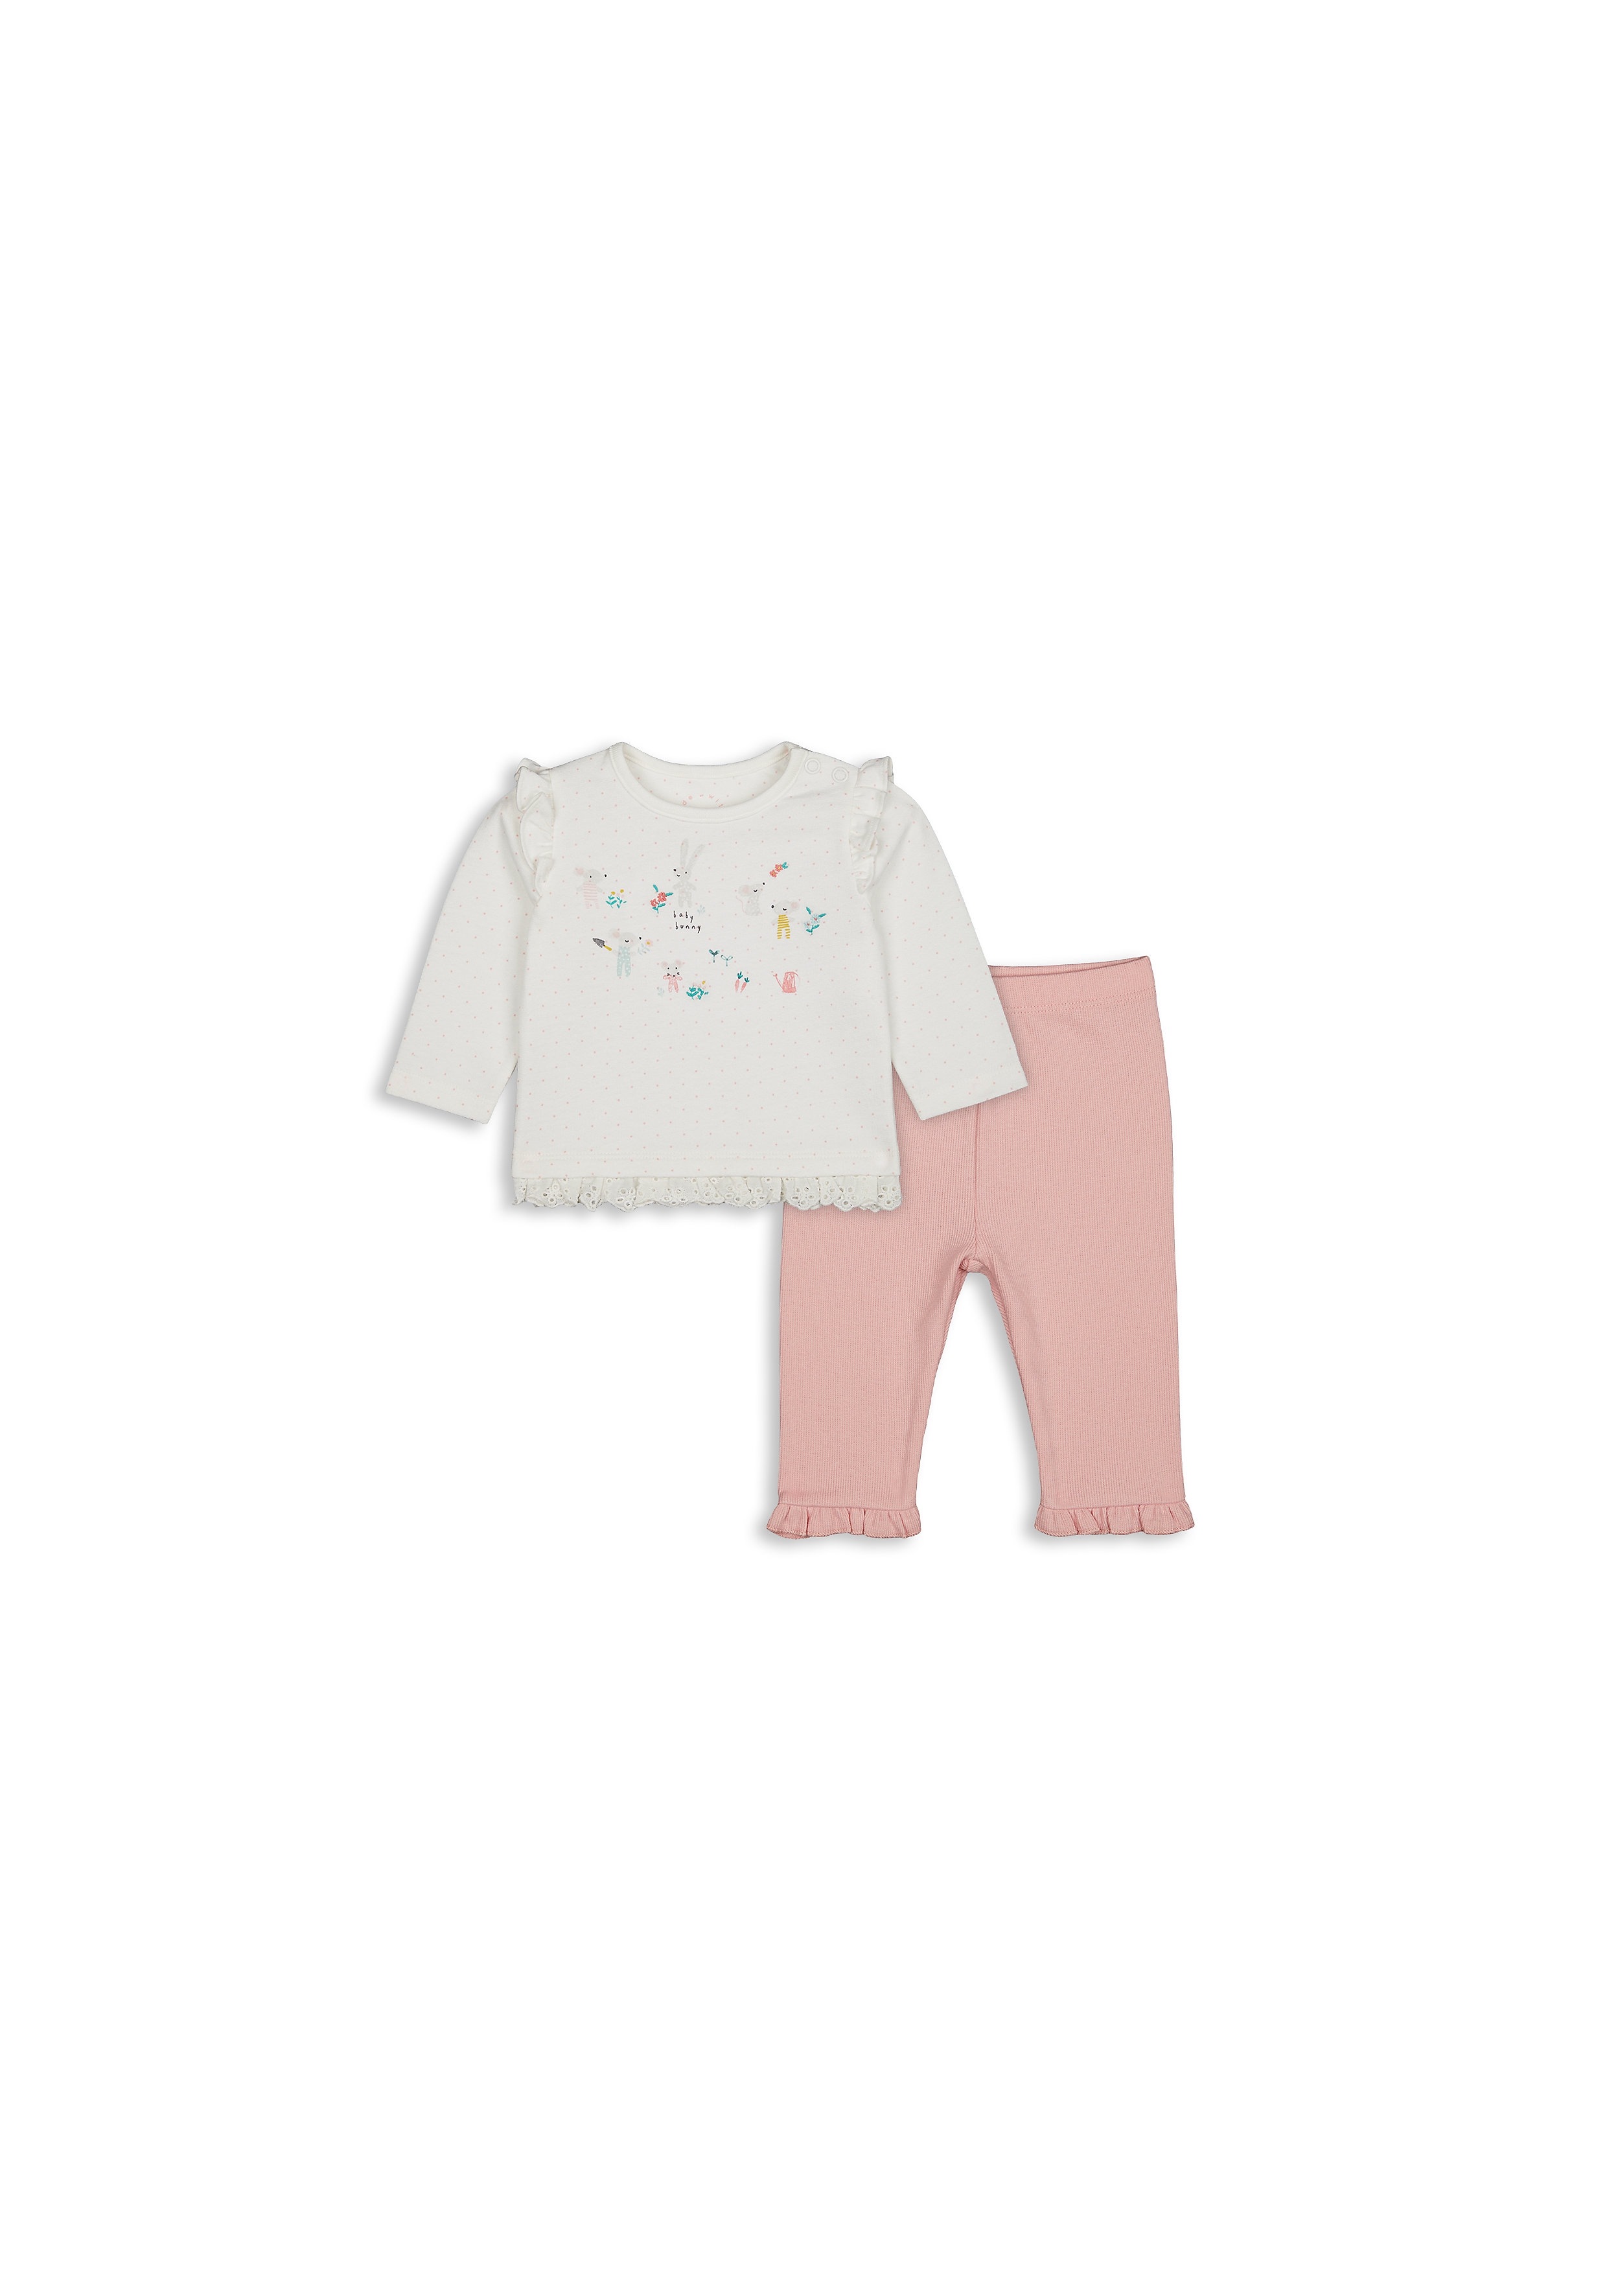 Mothercare | Girls Full Sleeves Top And Legging Set Bunny Print With Lace Detail - Multicolor